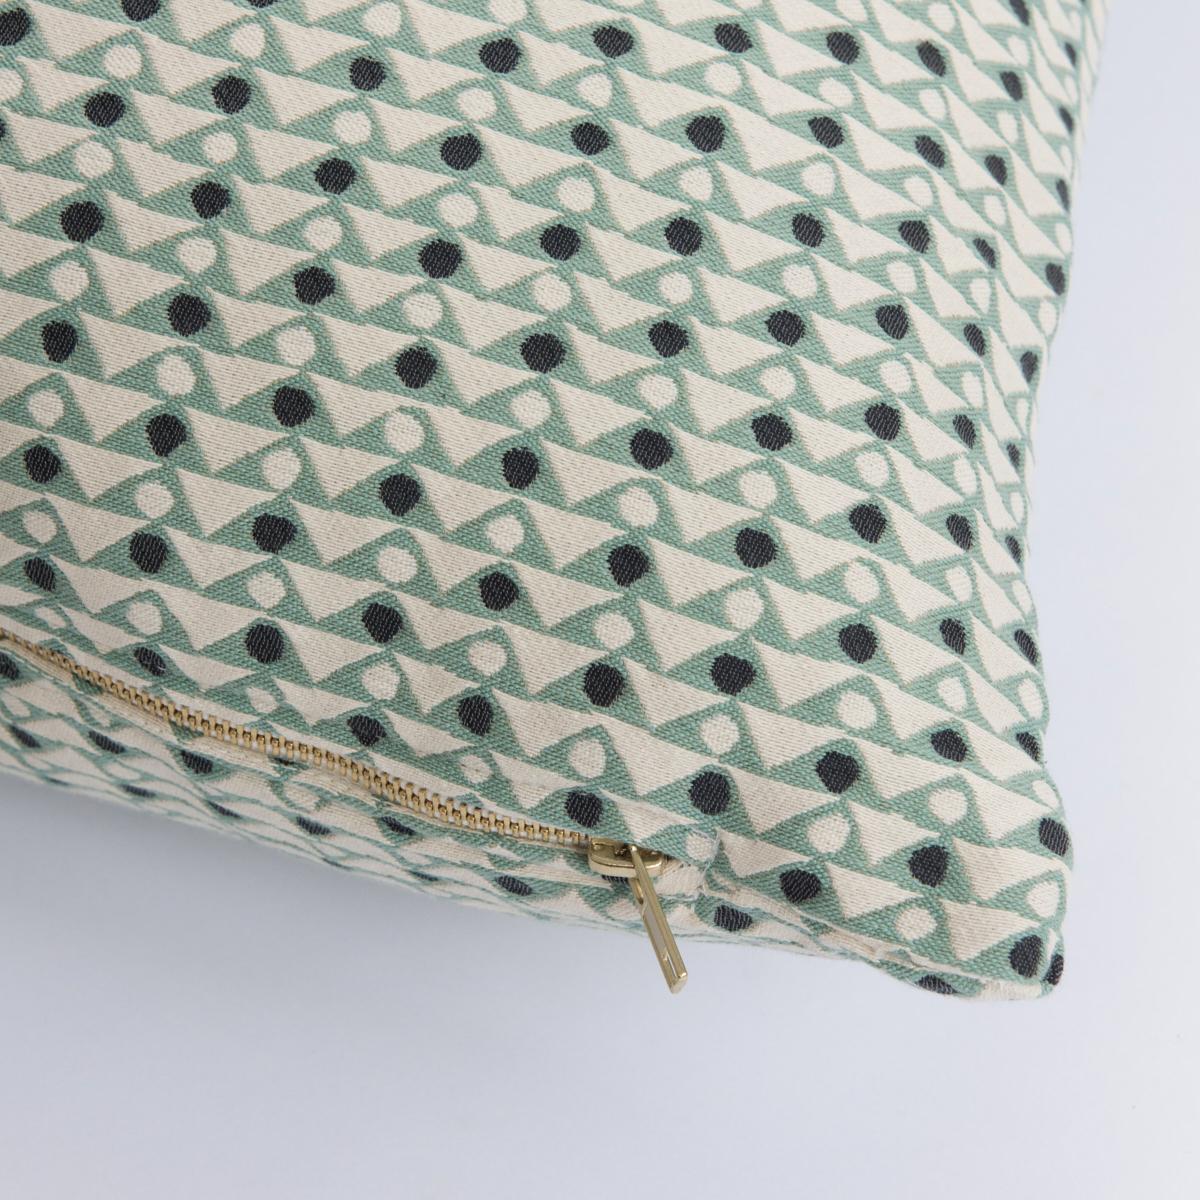 This pillow features Peacock Paynes by Caroline Z Hurley with a knife edge finish. Designed by Caroline Z Hurley in her Brooklyn studio and made on state-of-the-art looms in one of the few remaining American mills. Pillow includes a feather/down